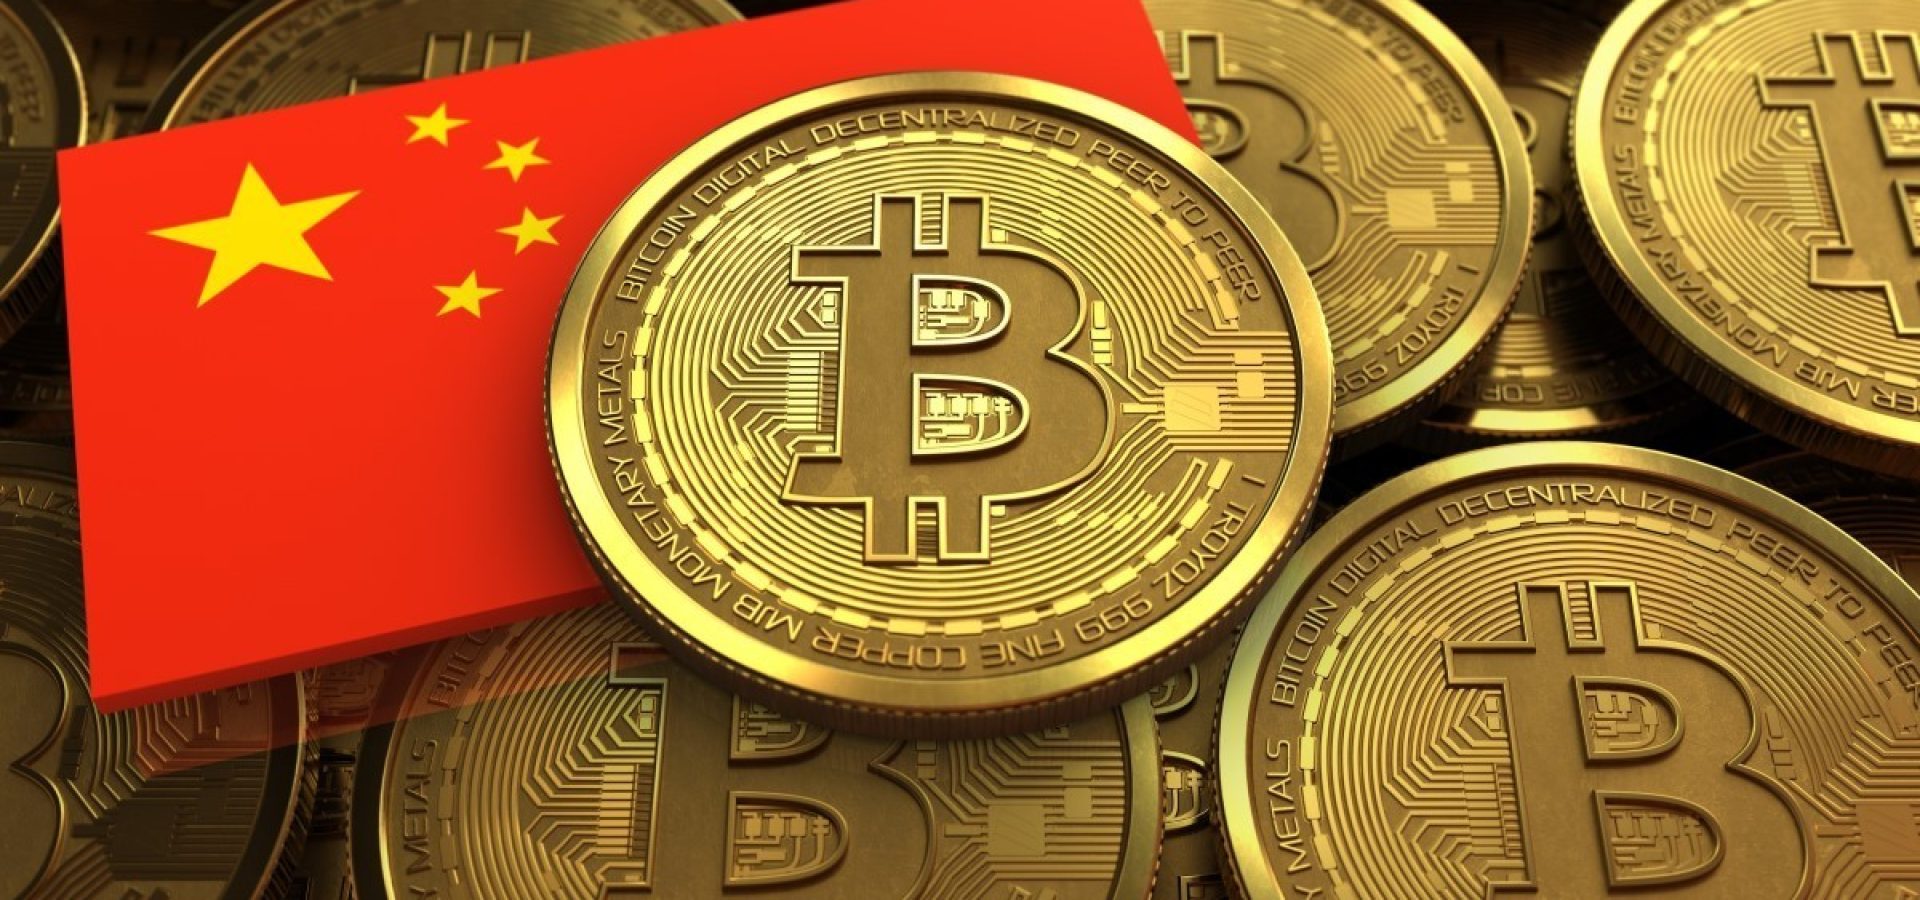 China and the digital currency market